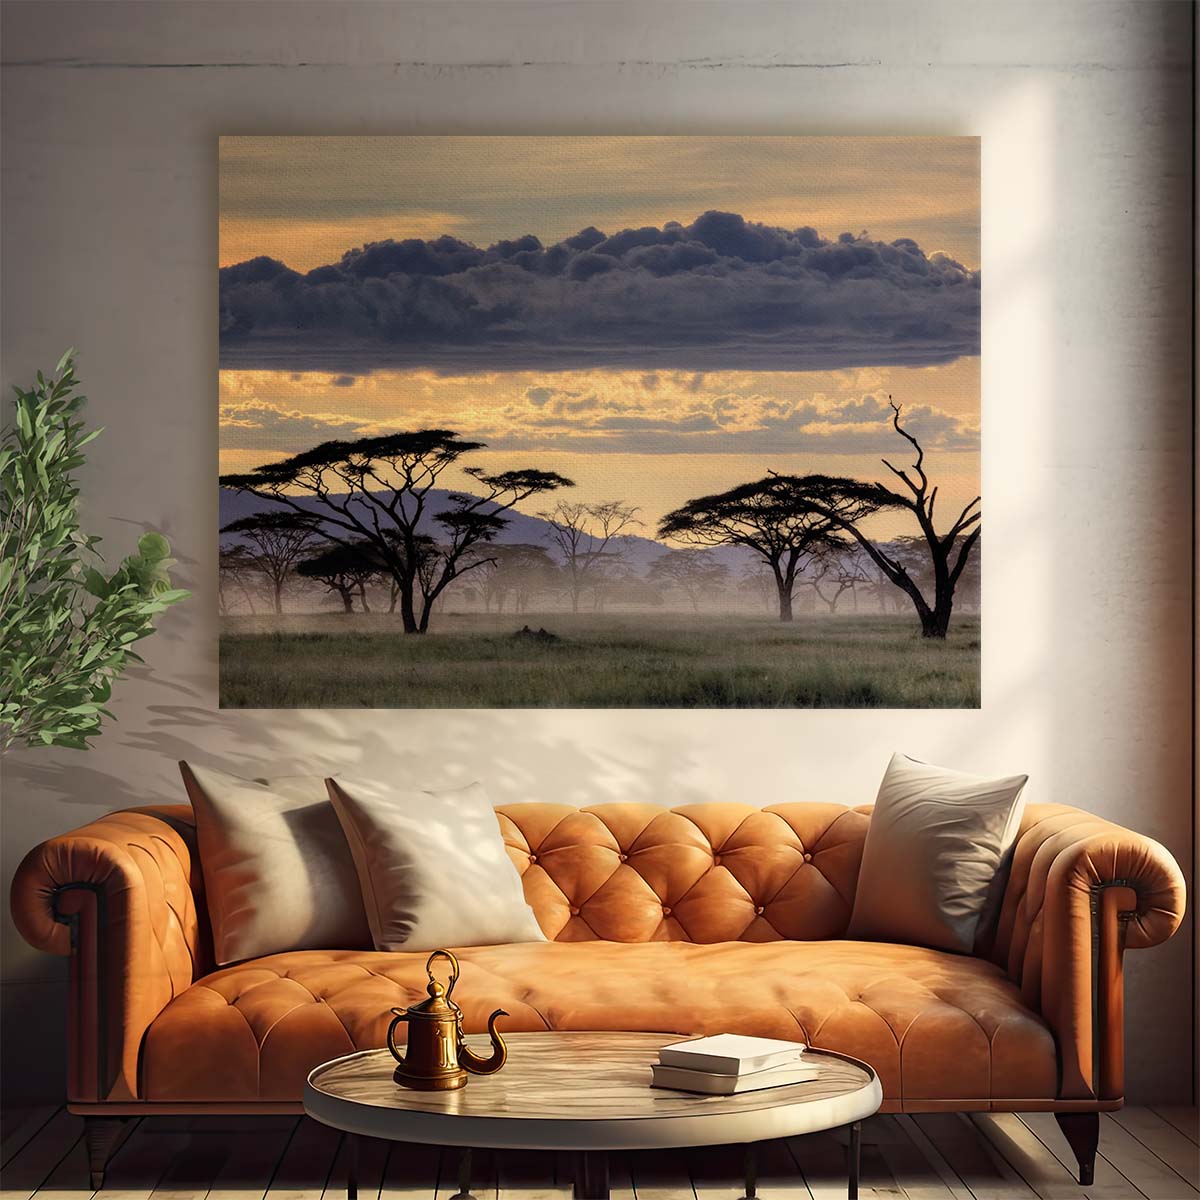 Tanzania Savannah Sunset & Misty Trees Wall Art by Luxuriance Designs. Made in USA.